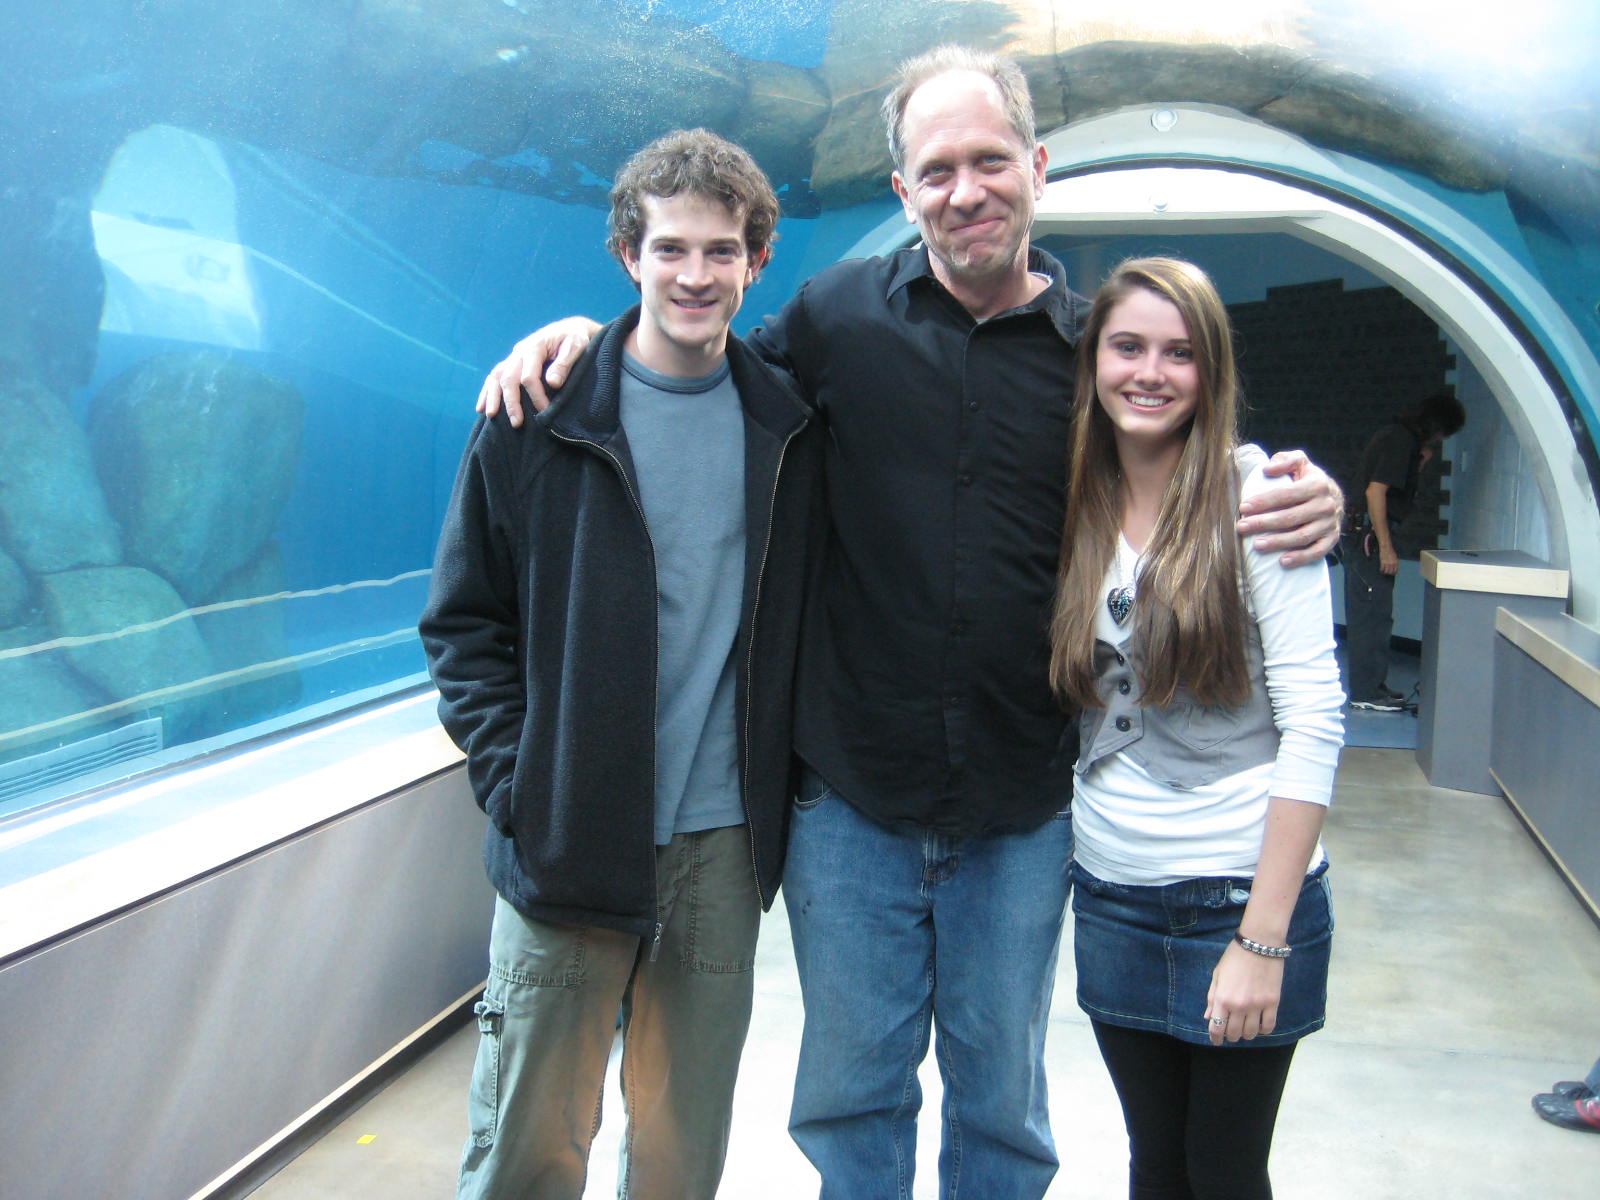 Courtney Baxter, Gary Grieg and AJ. Pittsburgh Zoo & PPG Aquarium commercial. October 7, 2008.